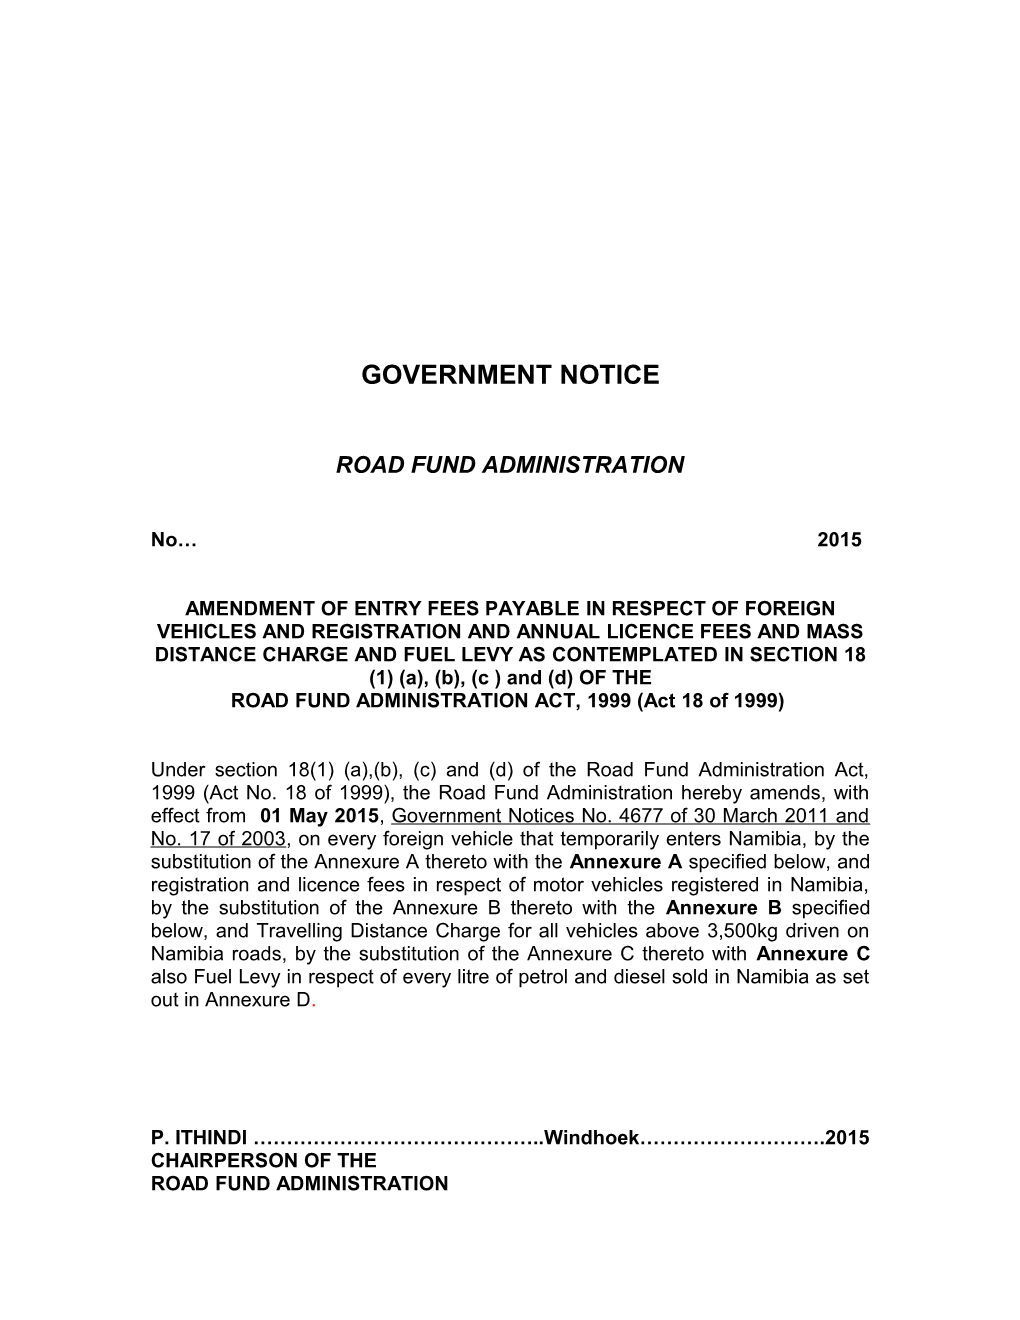 ROAD FUND ADMINISTRATION ACT, 1999 (Act 18 Of1999)